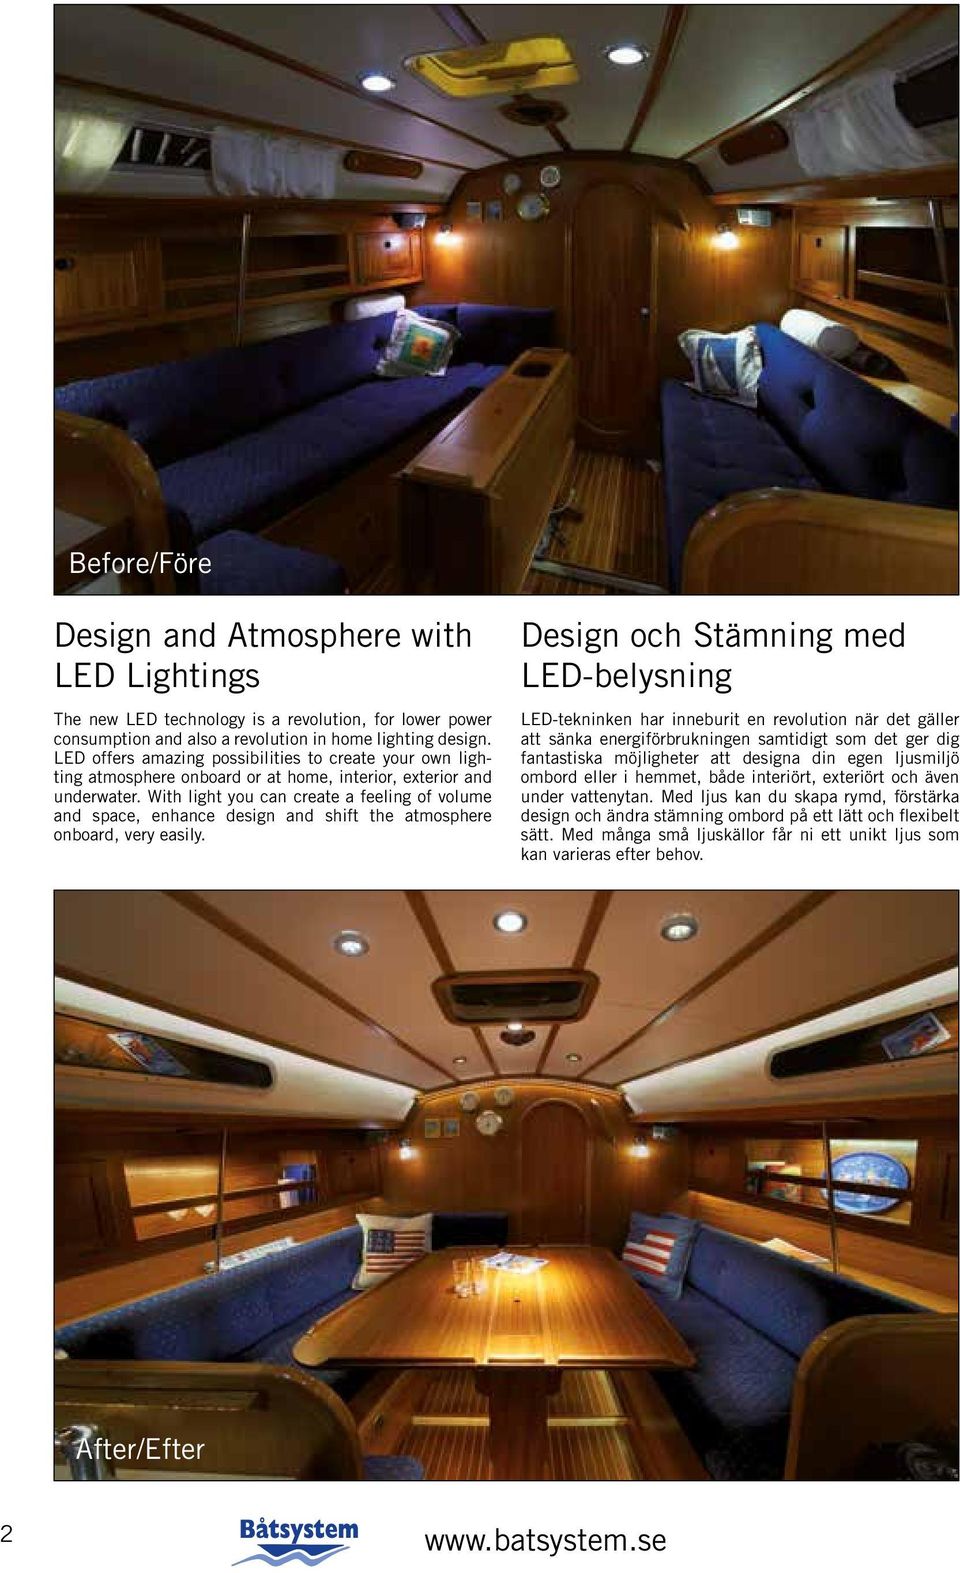 With light you can create a feeling of volume and space, enhance design and shift the atmosphere onboard, very easily.